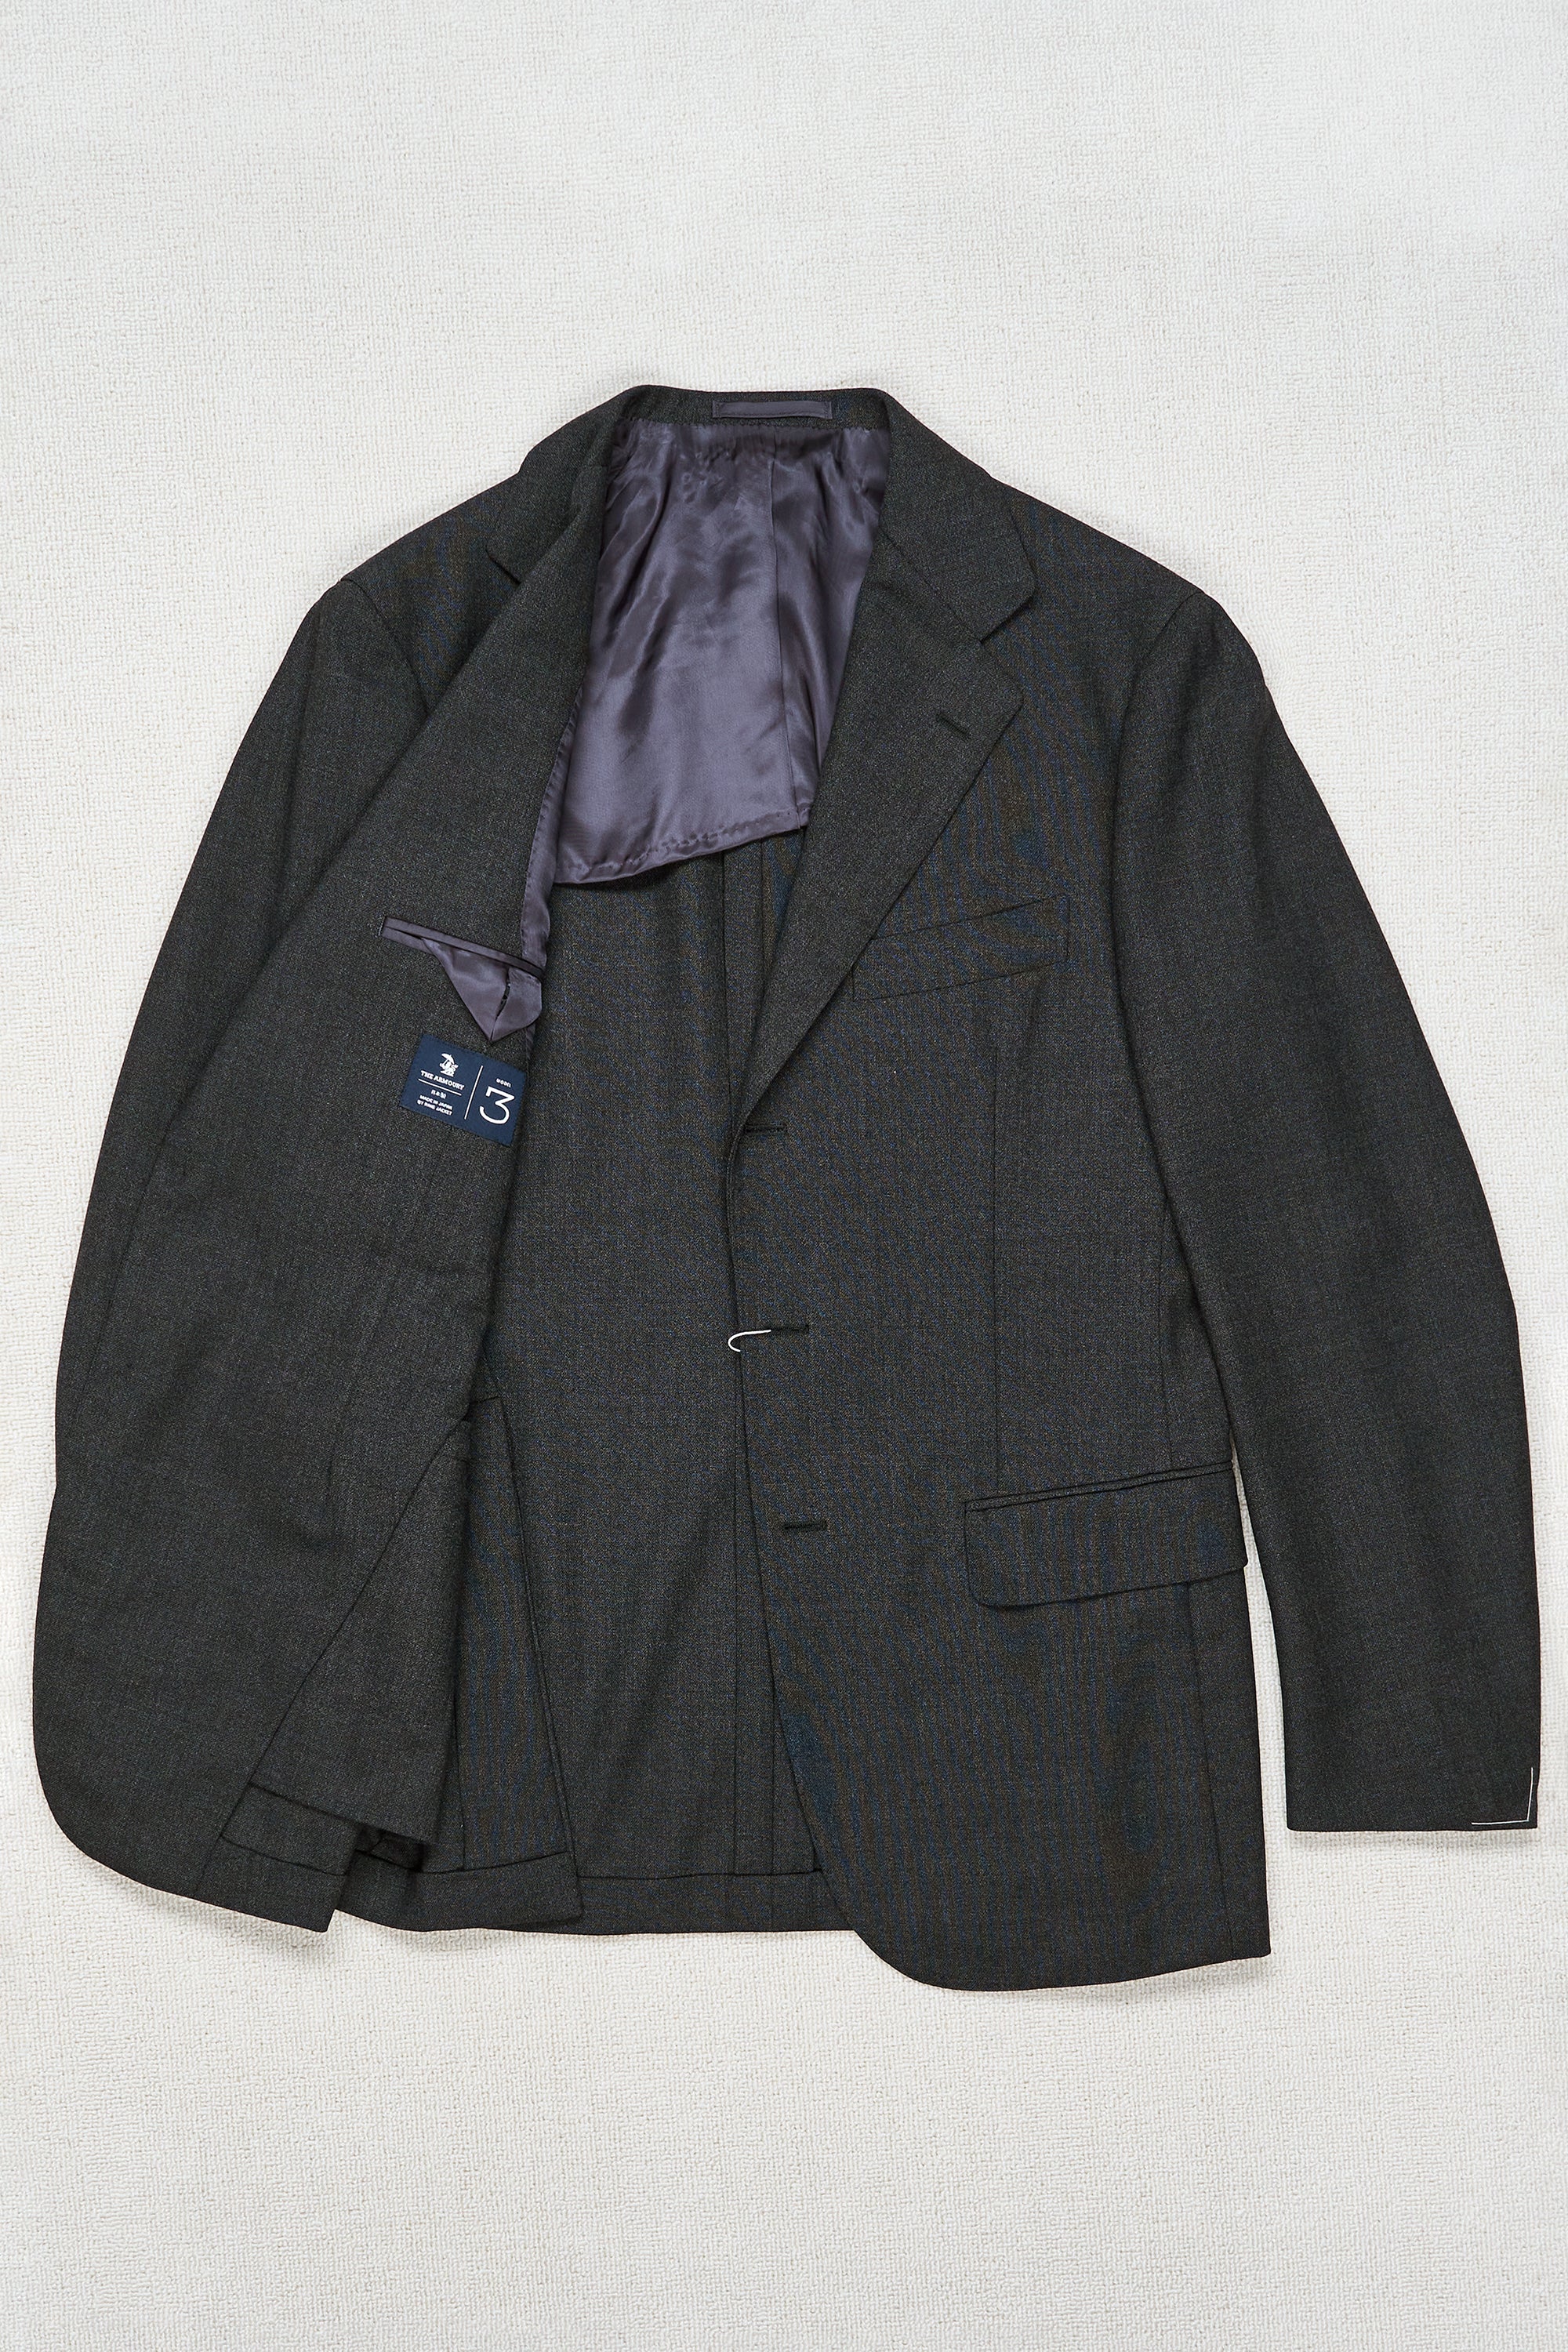 The Armoury by Ring Jacket Model 3 Dark Grey Wool 4-ply Sport Coat